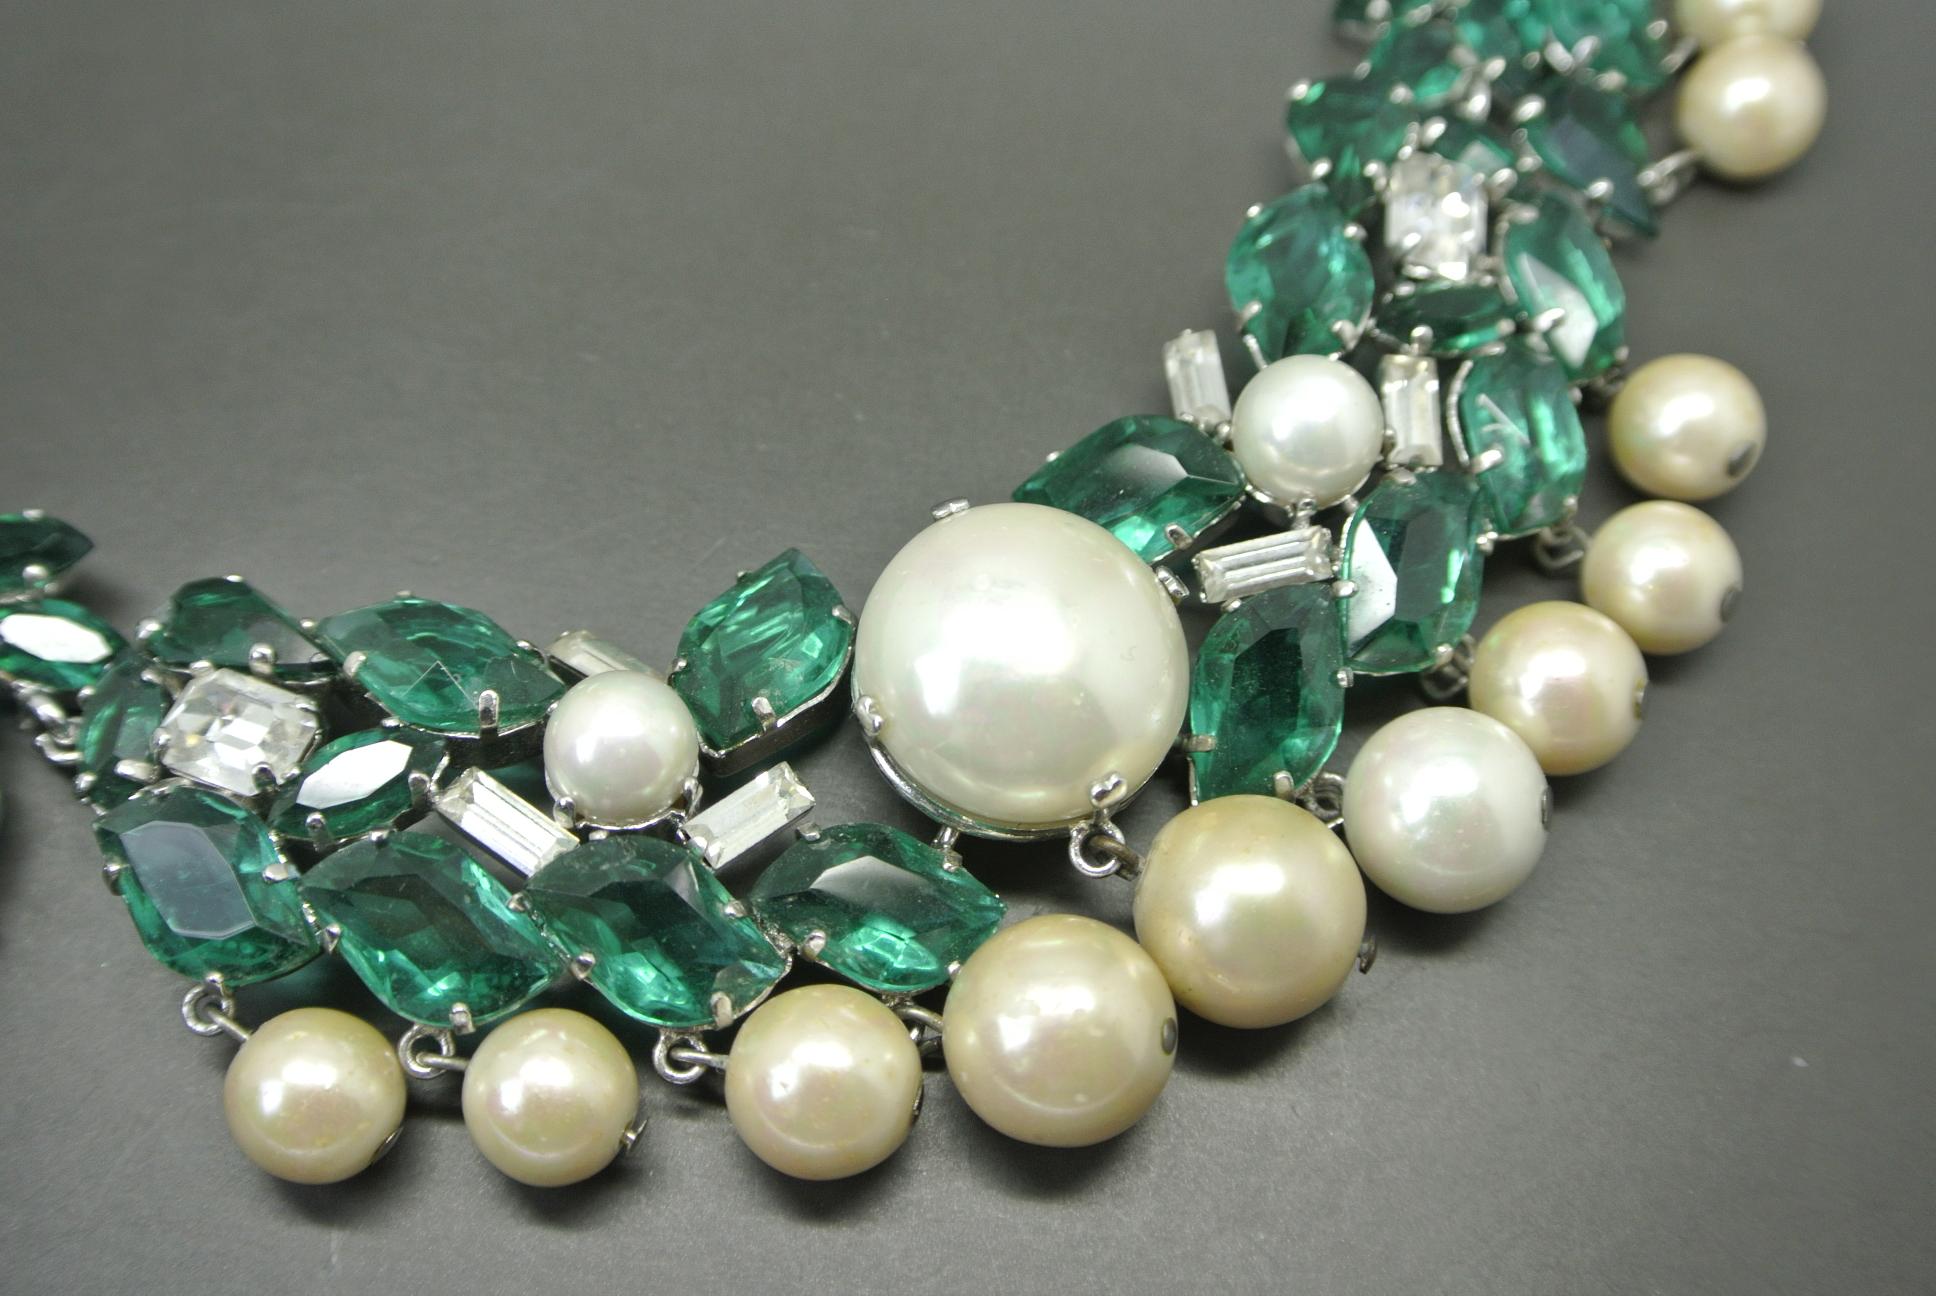 Christian Dior couture necklace
signed and dated 60s
